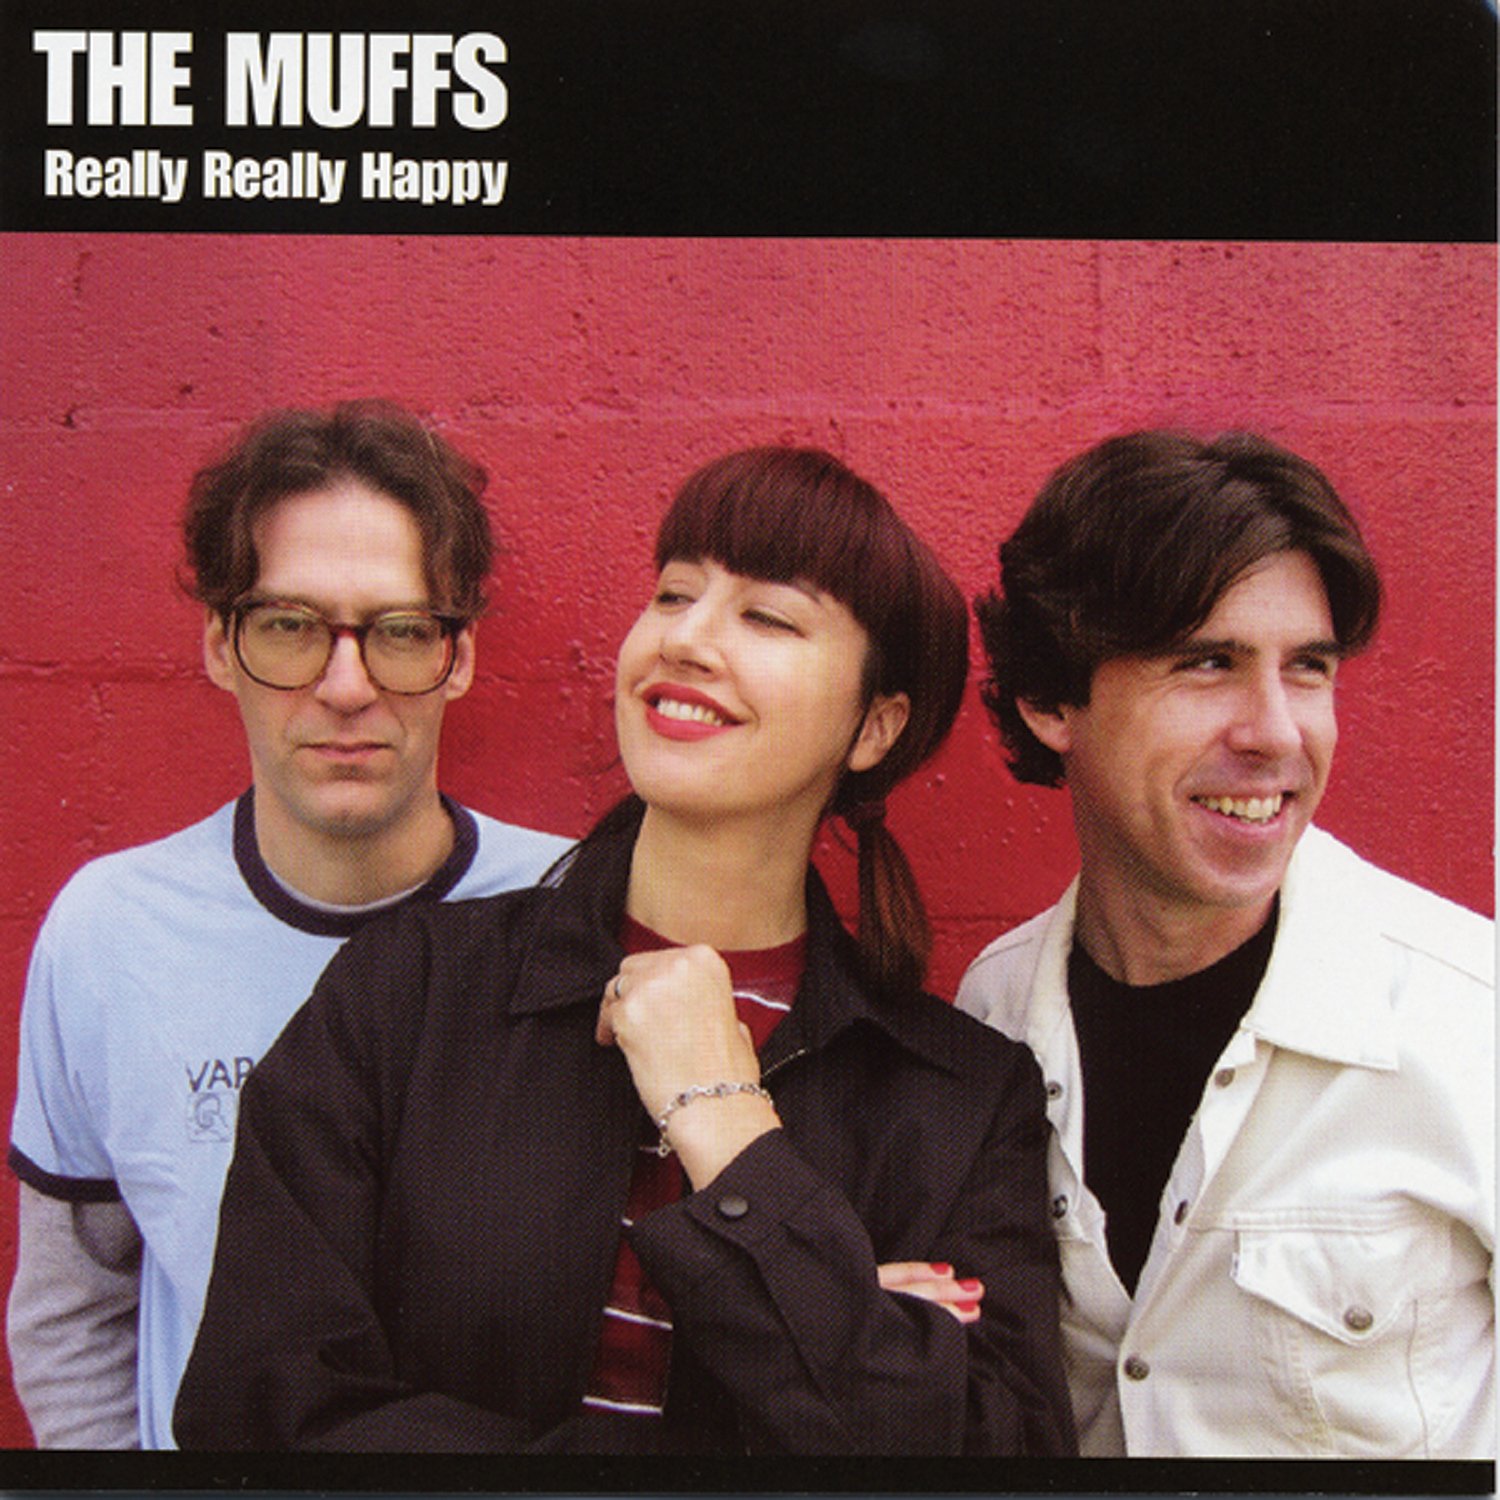 The Muffs-Really Really Happy-REISSUE-CD-FLAC-2004-401